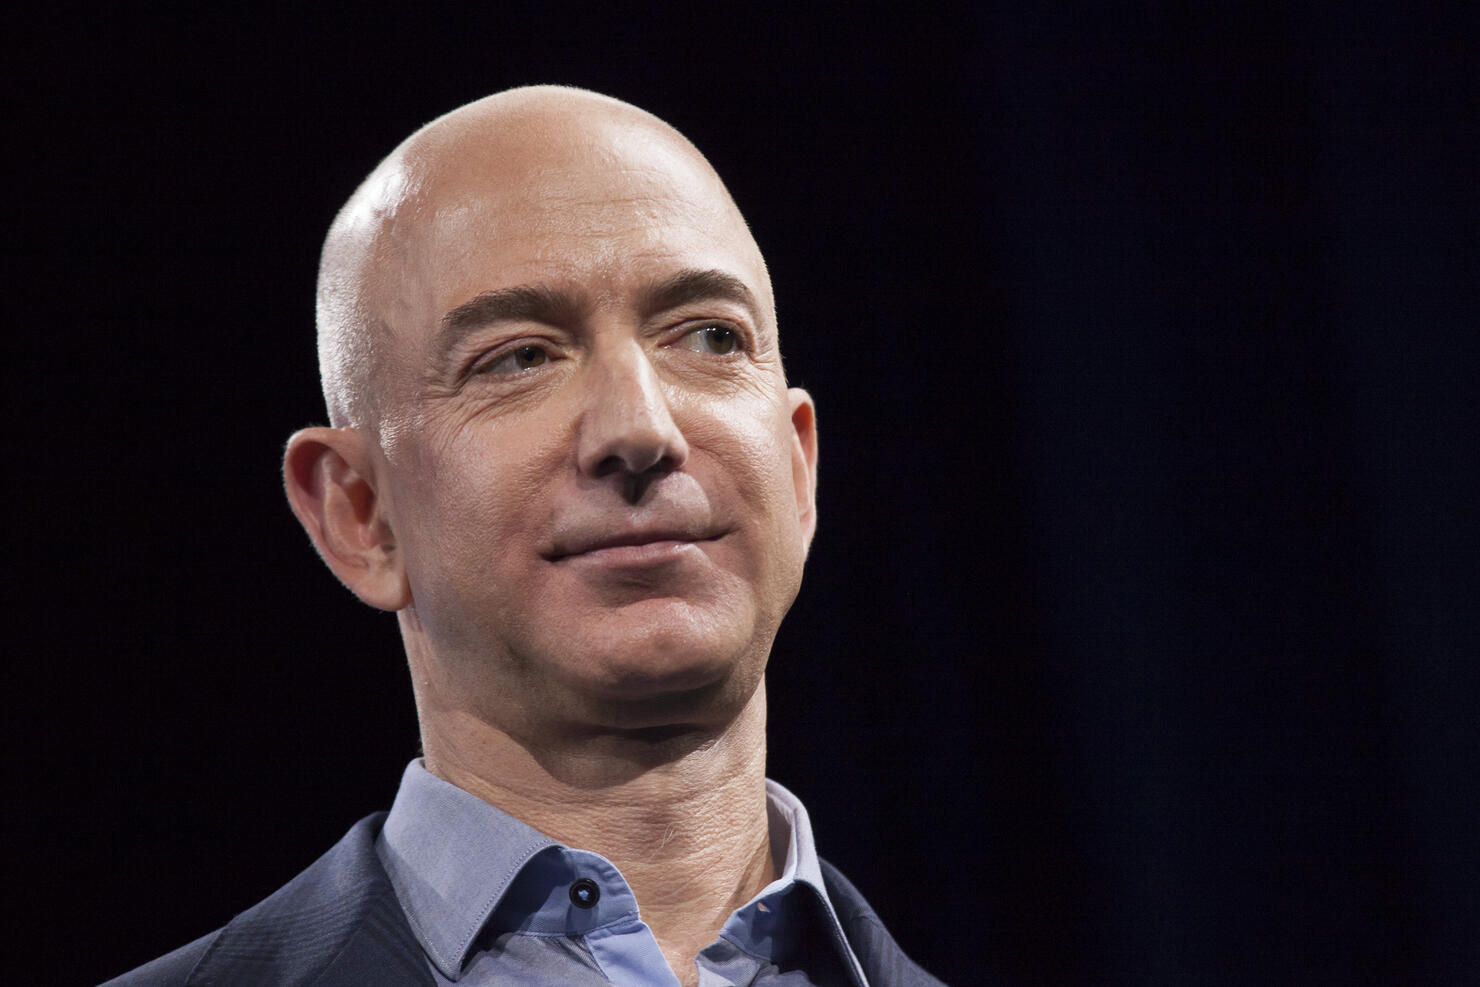 Amazon CEO Jeff Bezos remains richest person in the world